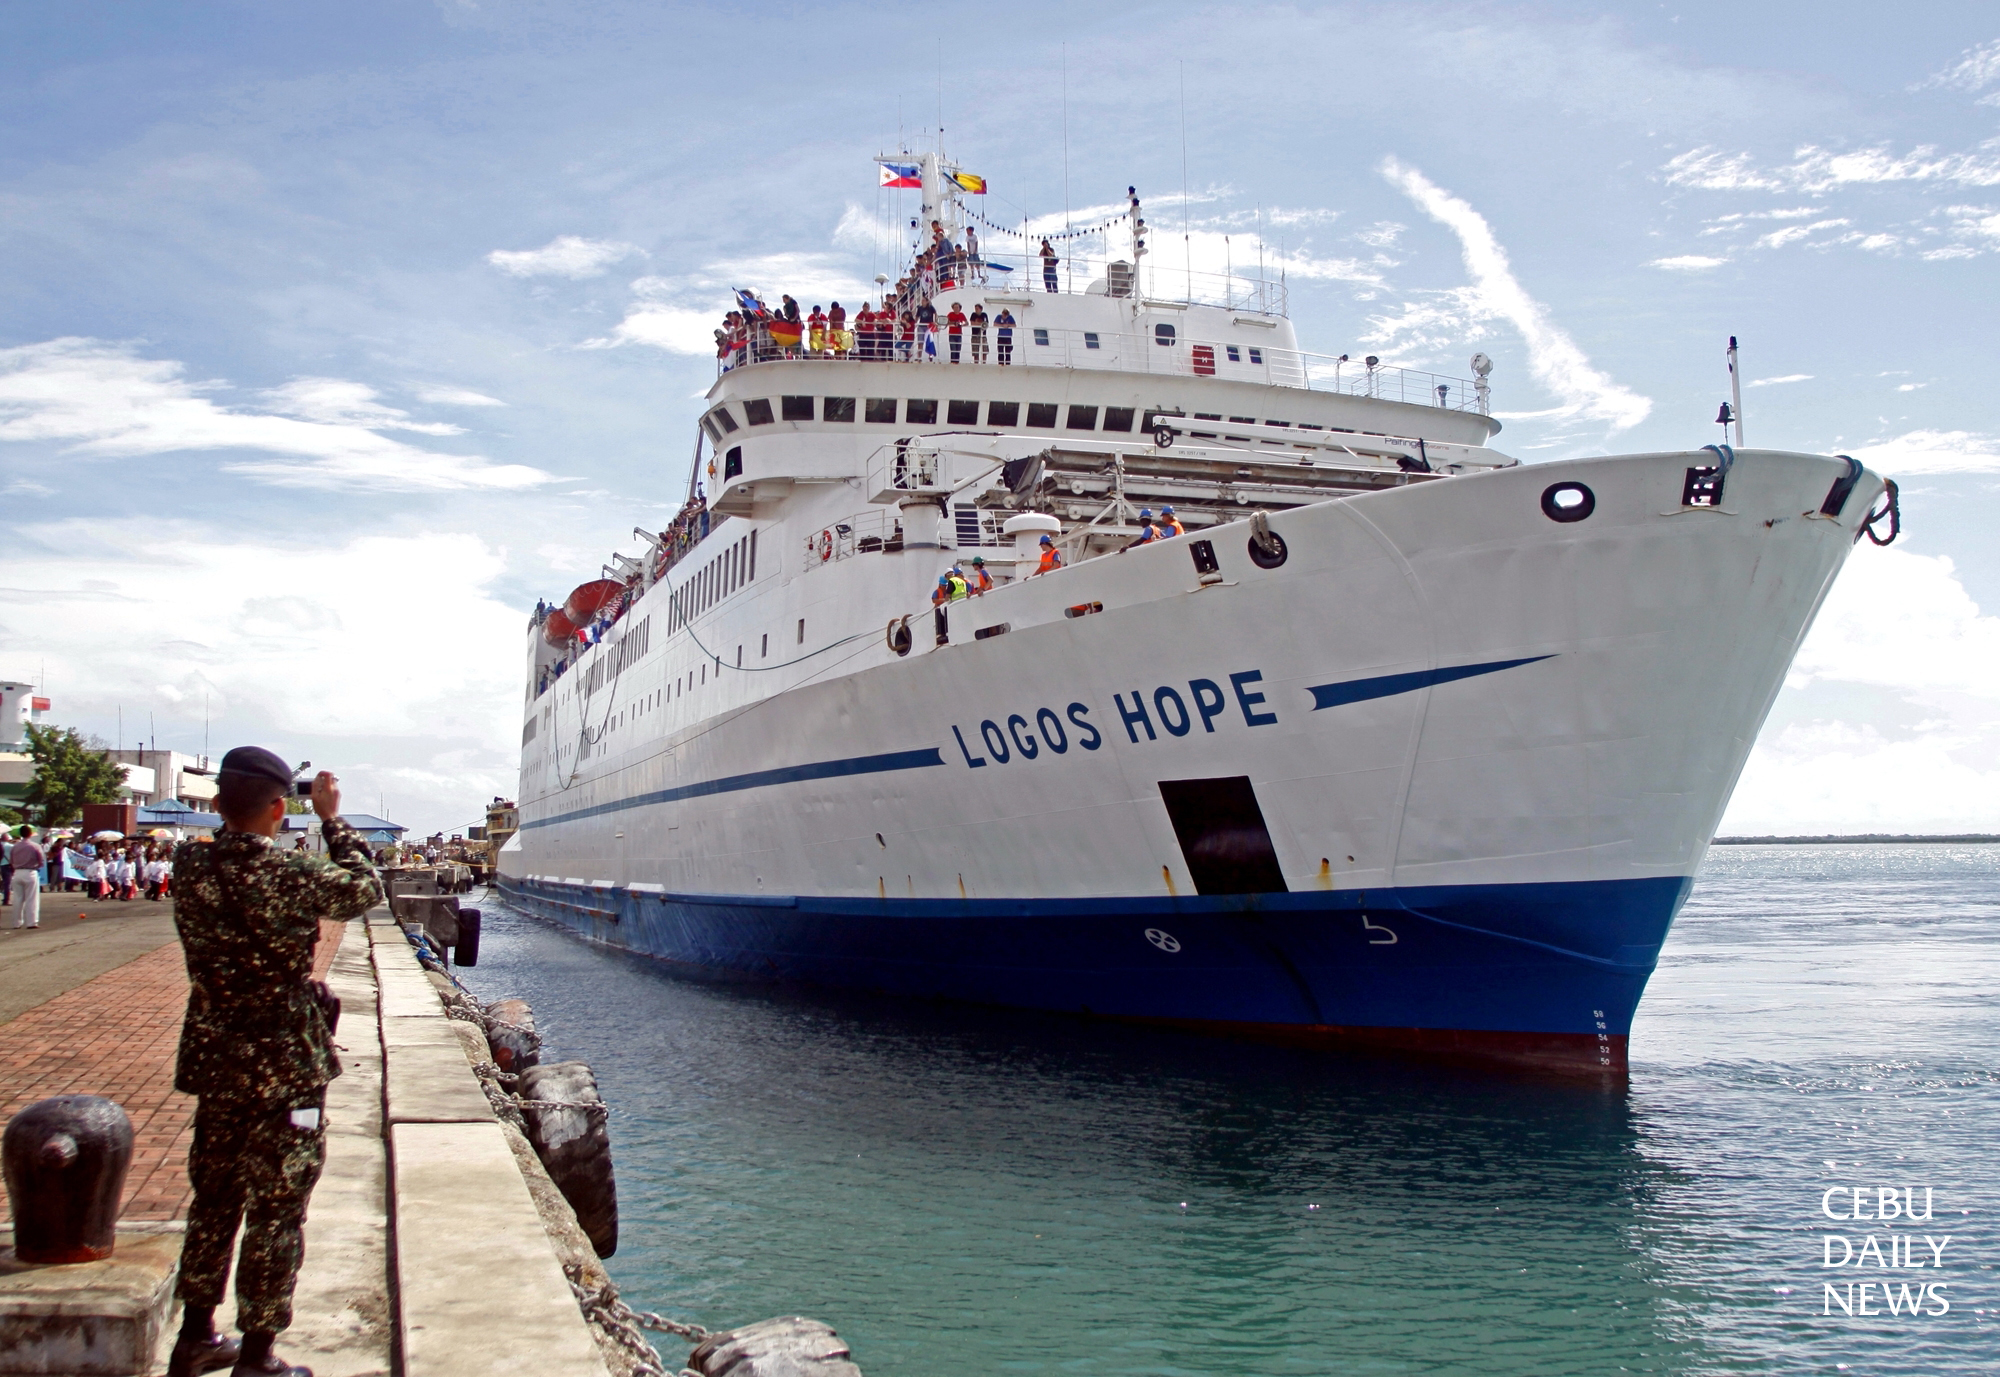 Twins Jeremiah and Krizia Ablaza hope to be accepted as volunteers in the MV Logos Hope, which docks in Cebu on May 5.